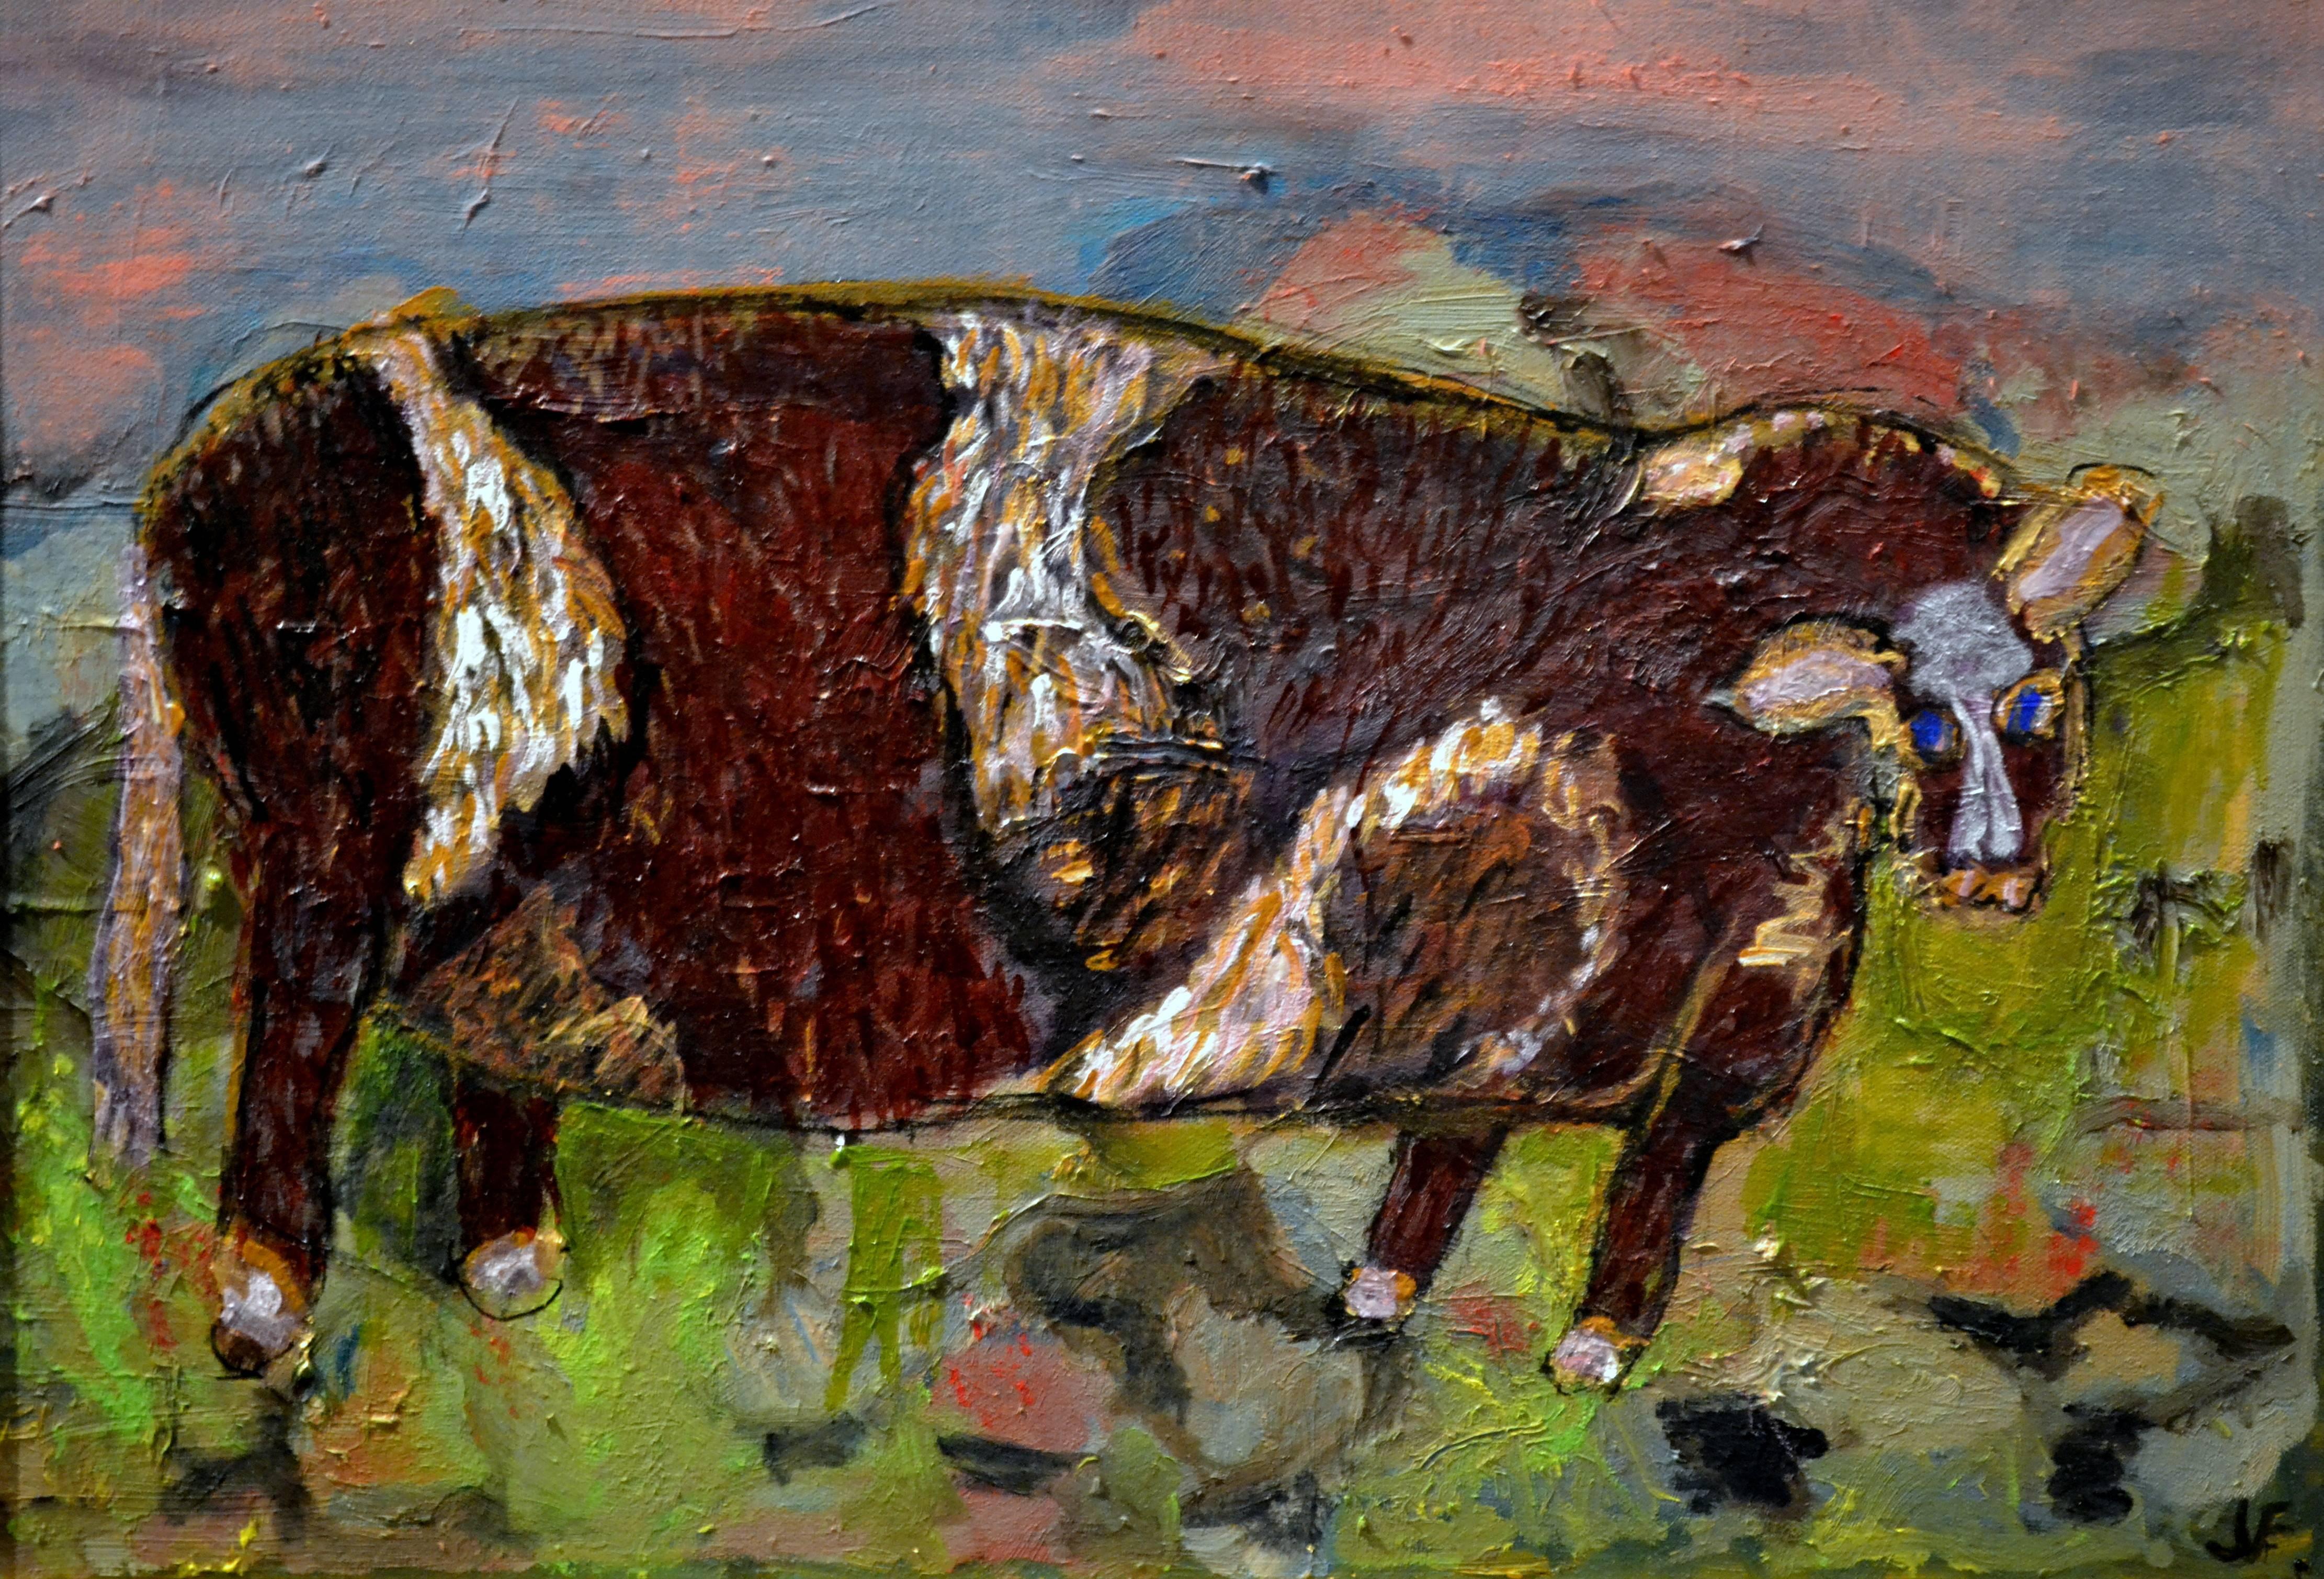 American Expressionist Portrait of a Blue-Eyed Cow by Artist JoAnne Fleming